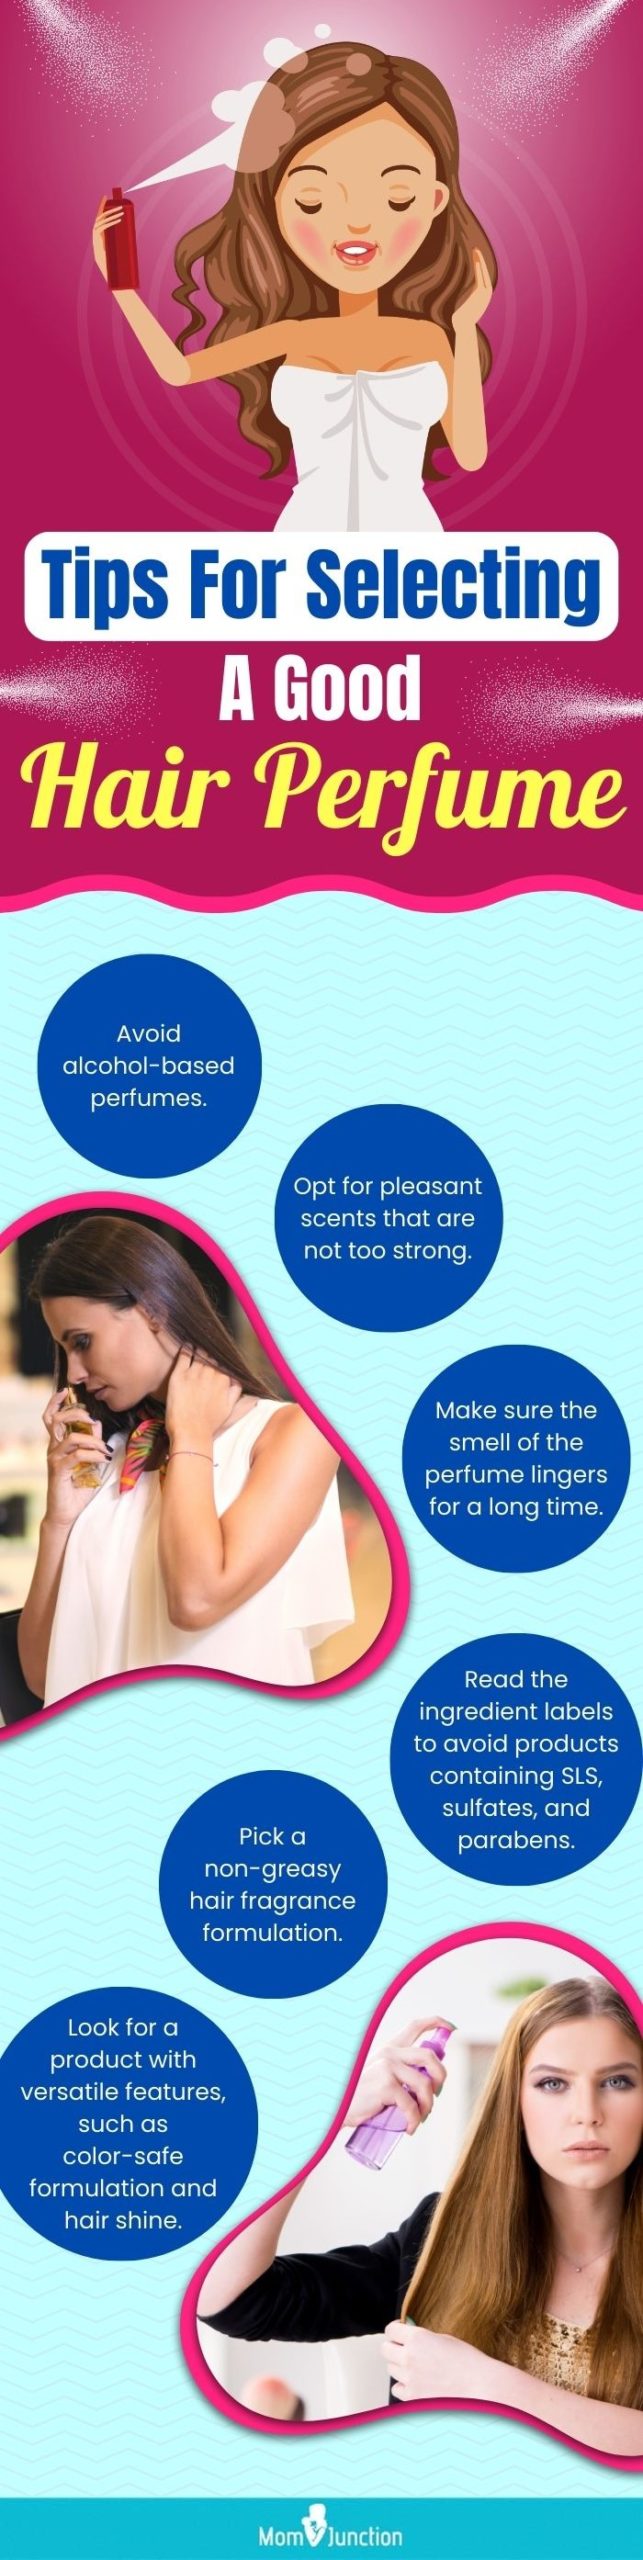 Advice For Selecting A Good Perfume For Hairs(infographic)